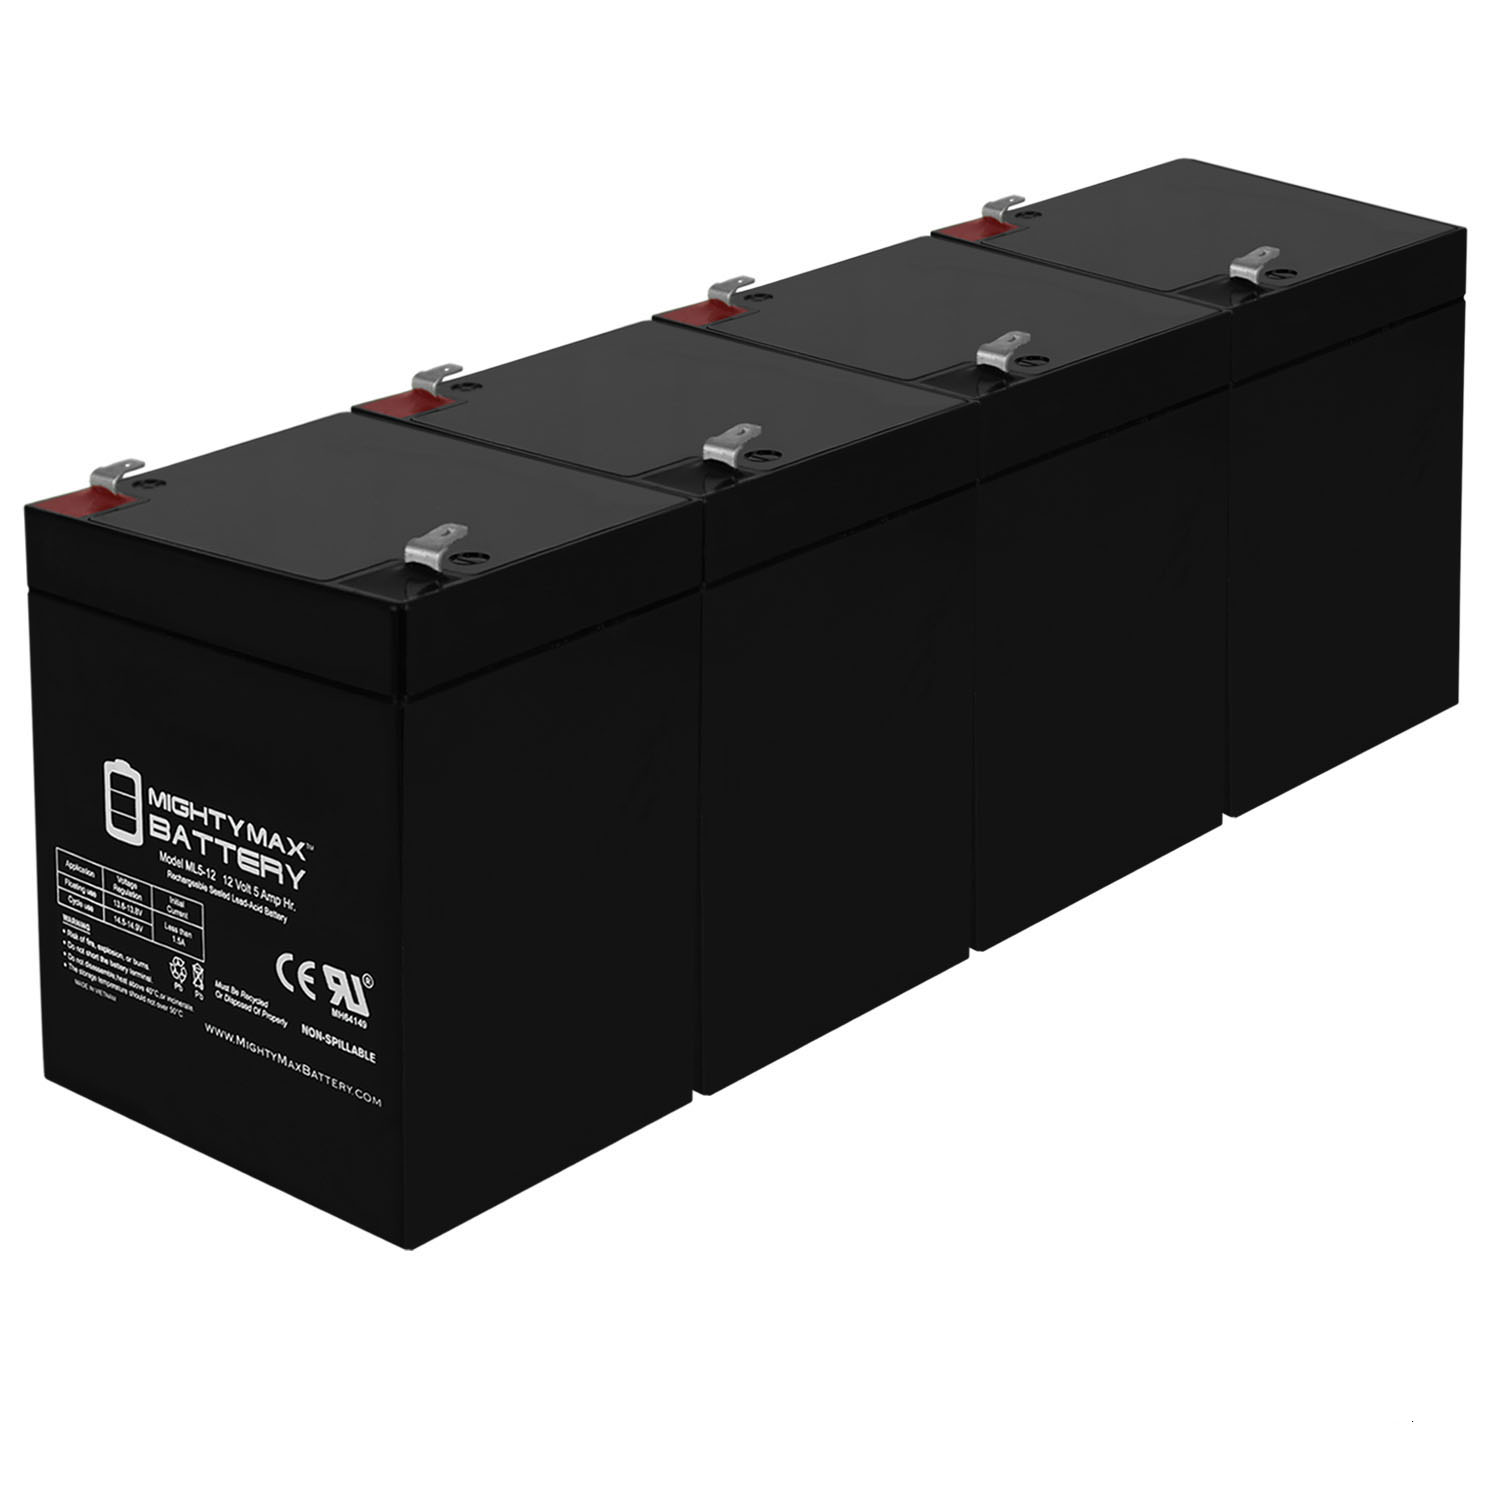 12V 5AH SLA Replacement Battery for Lintronics MX12040 - 4 Pack